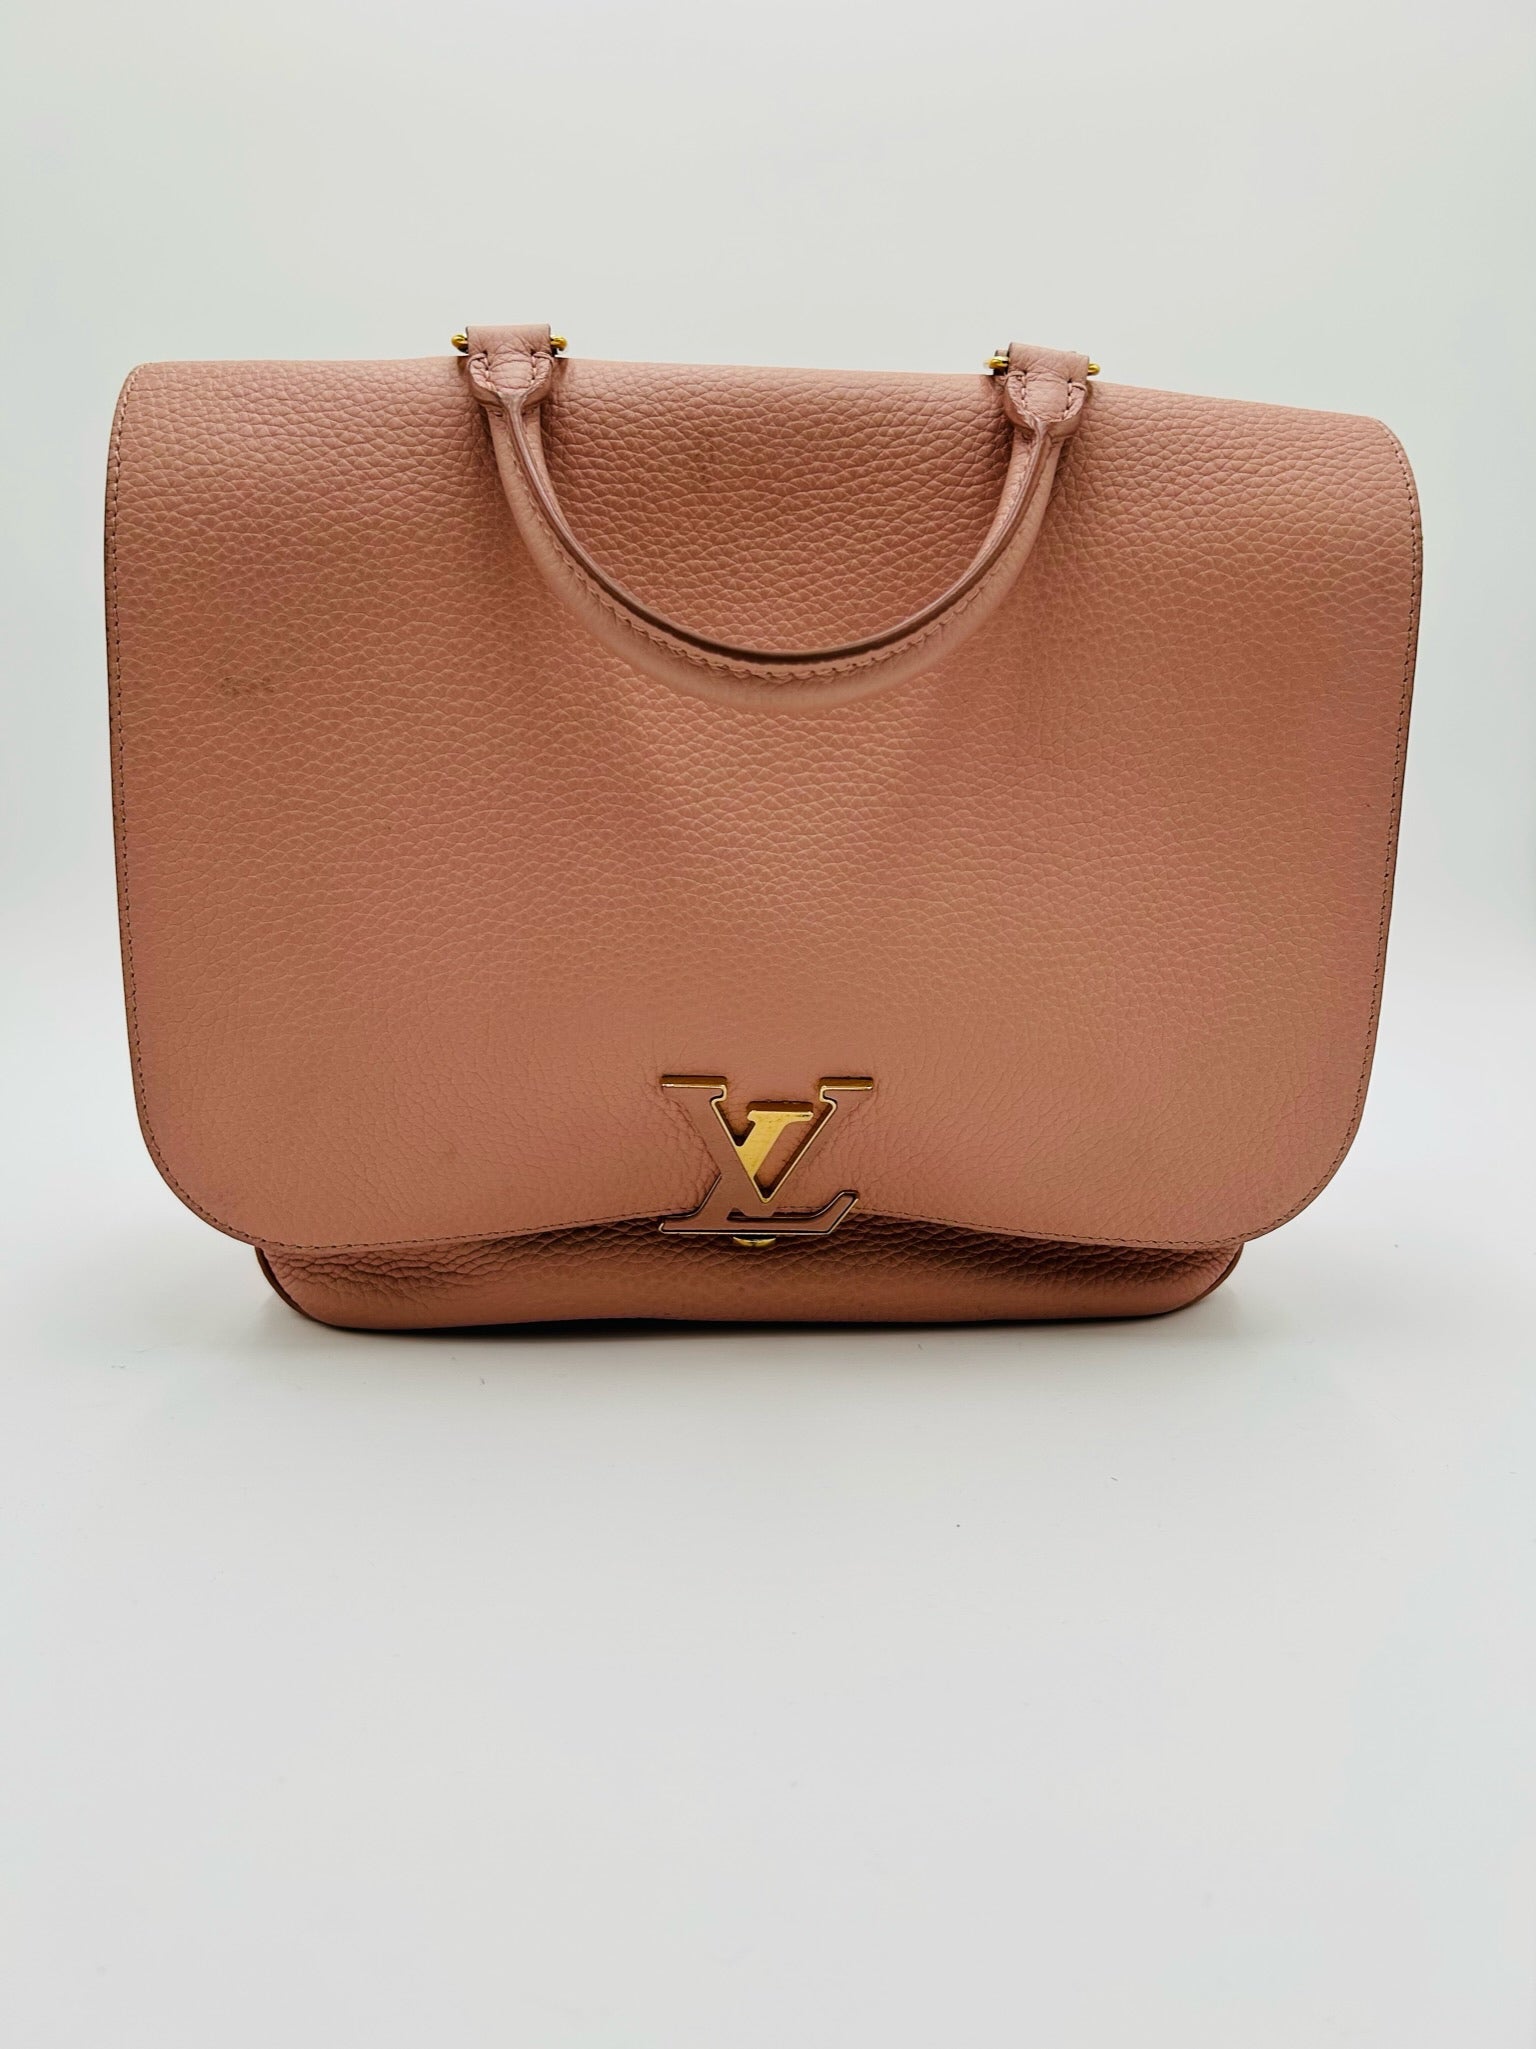 LV LIMITED EDITION VOLTA  TAURILLON CAPUCINES PM PINK